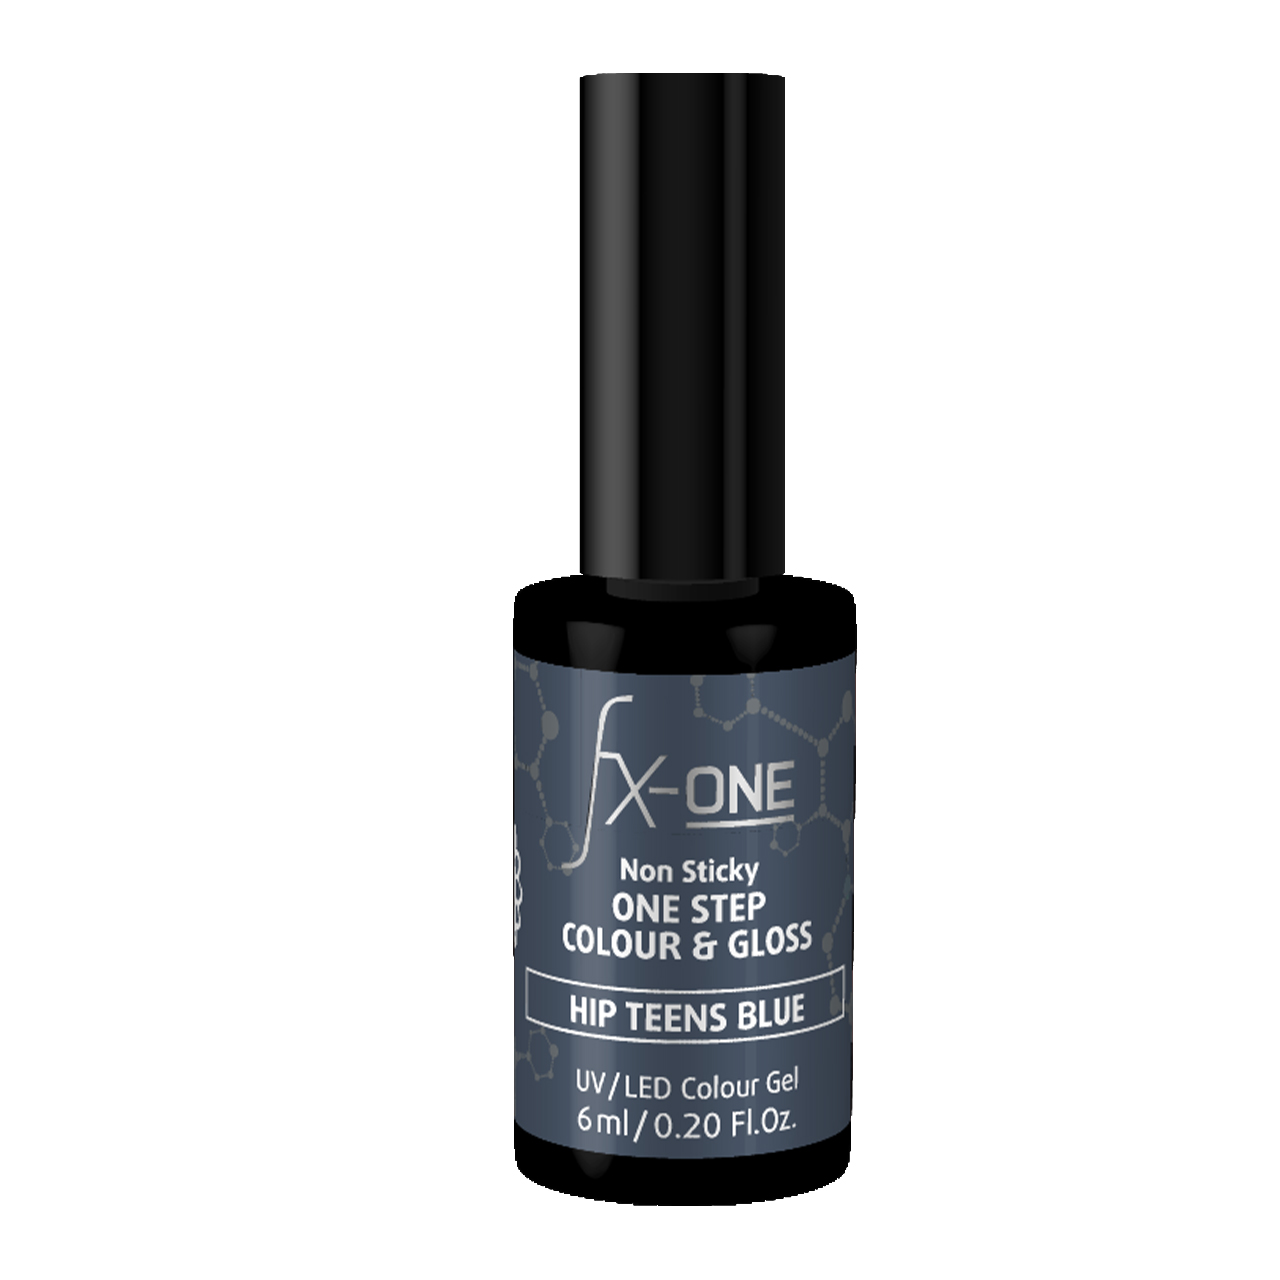 FX-ONE Colour & Gloss Blueberry Muffin 6ml | Blueberry Muffin | 02-939